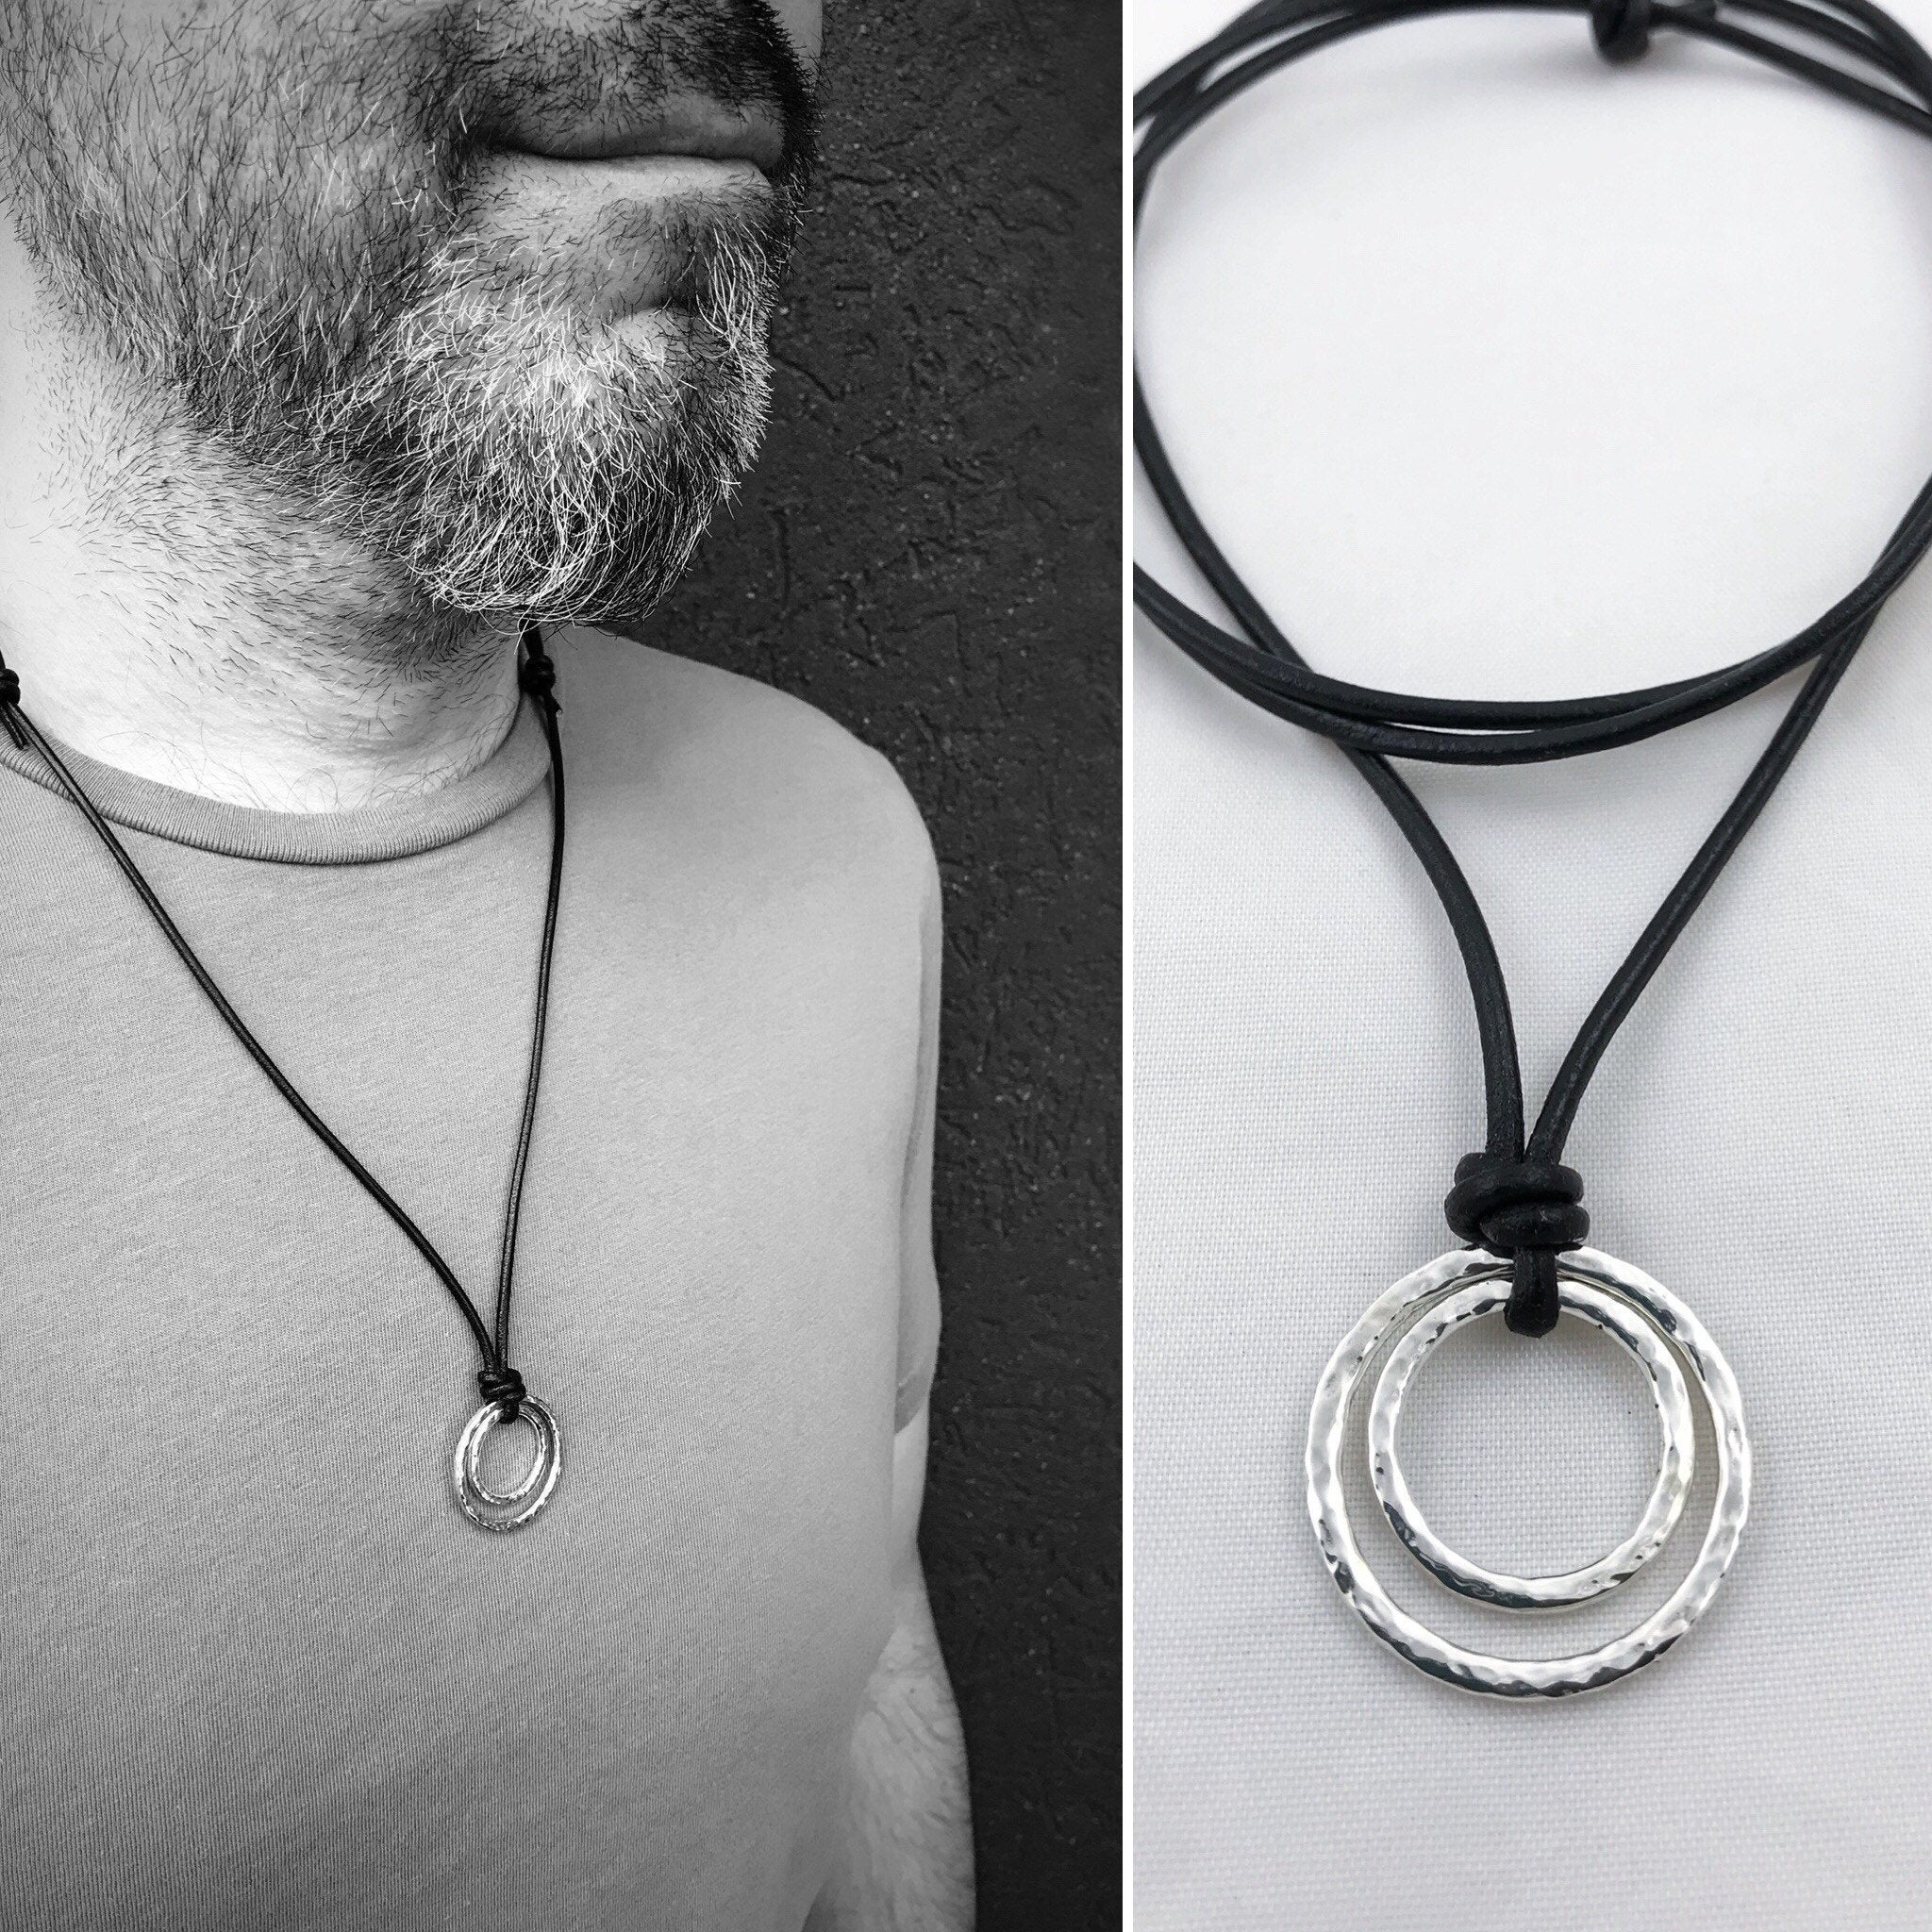 Men's Two Circle Necklace / Solid Sterling Silver / Rustic Hammer Forged  Nesting Circles / Adjustable Leather Cord